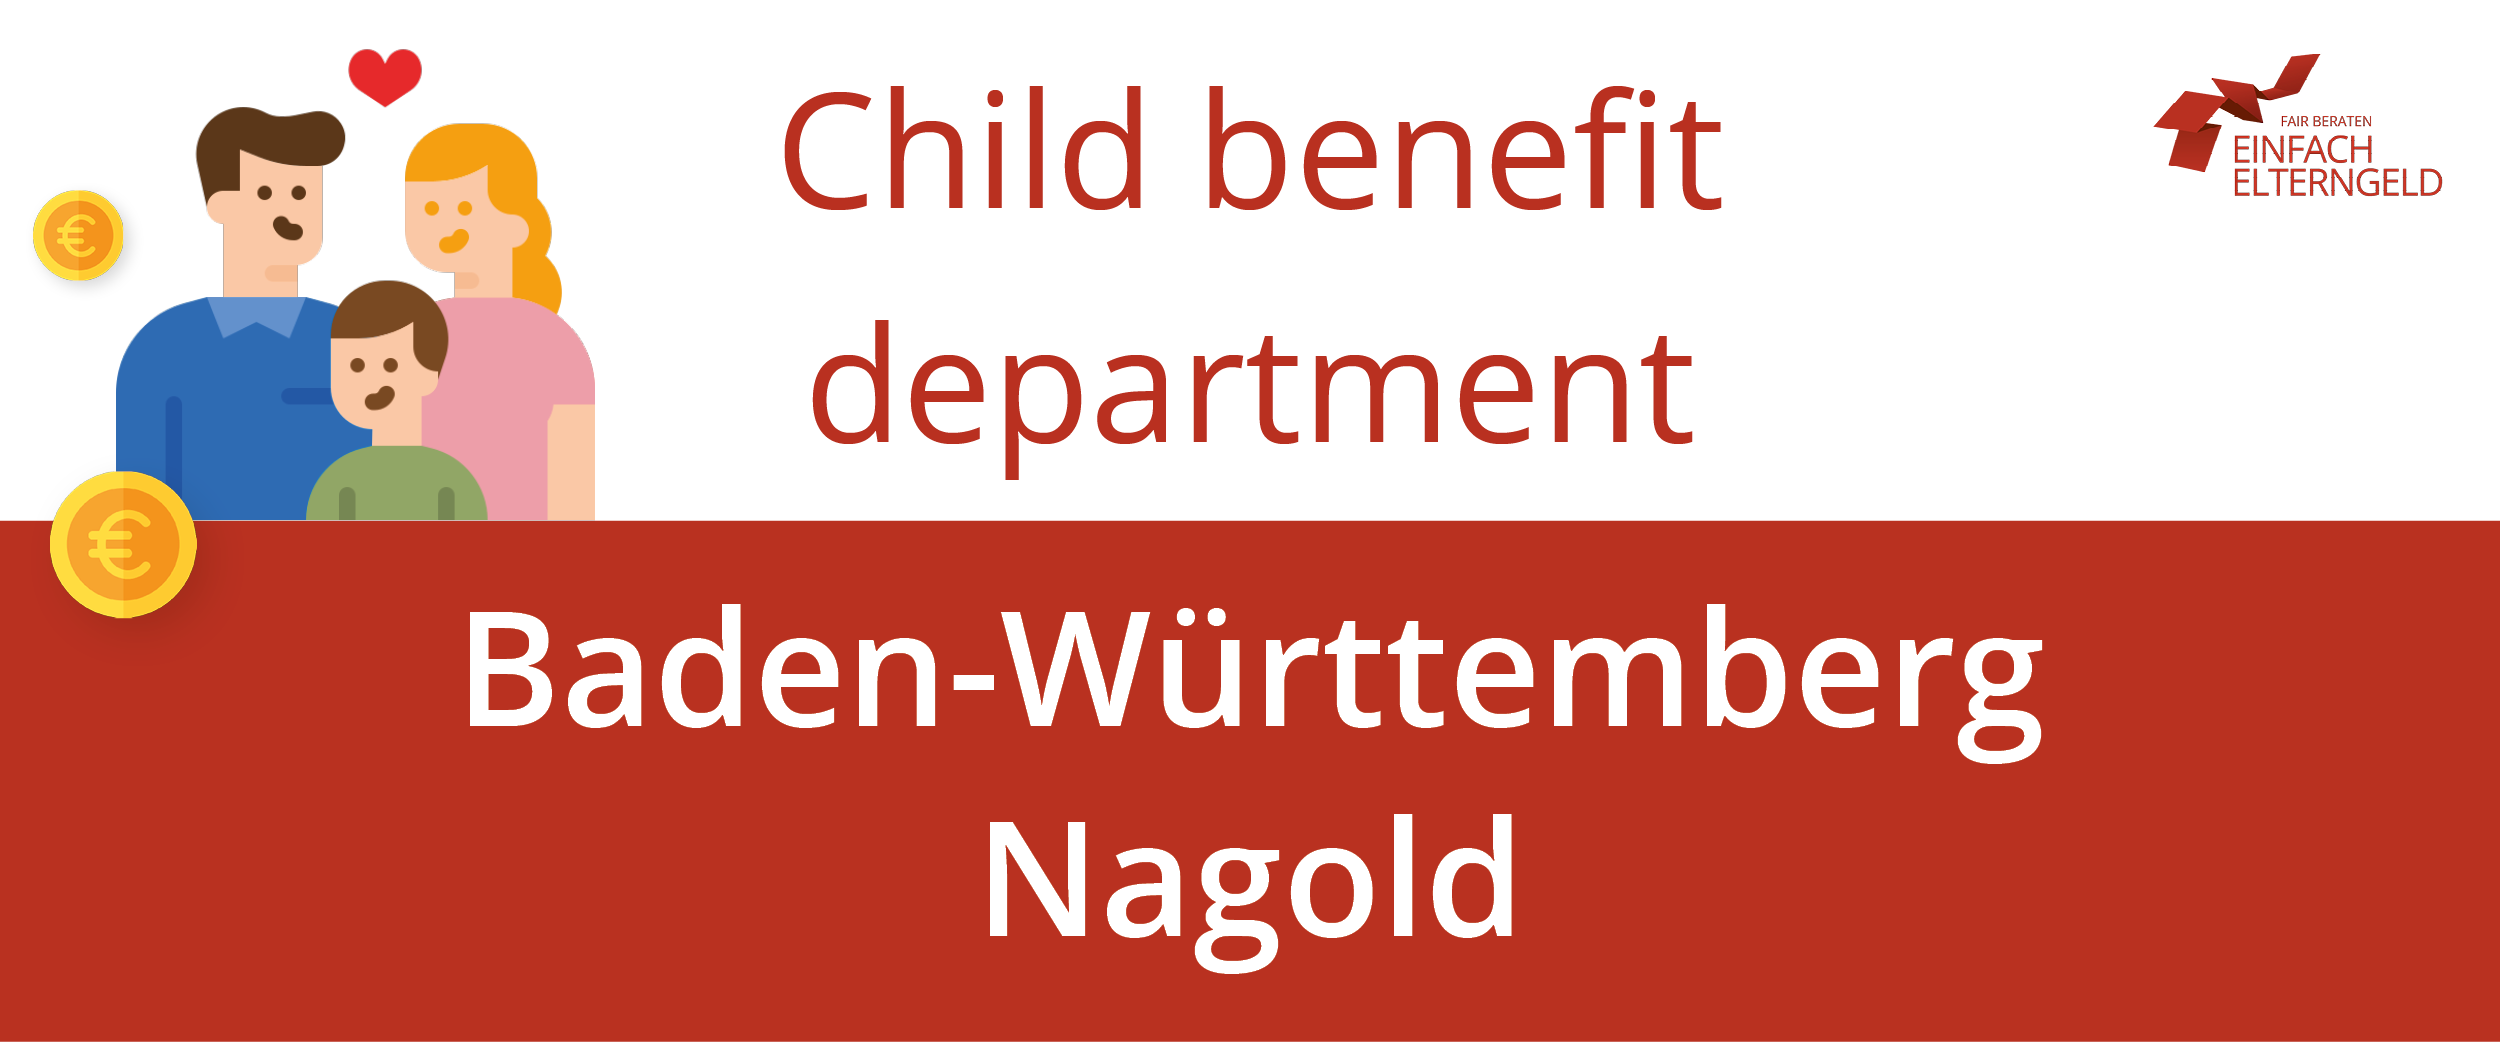 We present you the Child benefit department Baden-Württemberg Nagold.